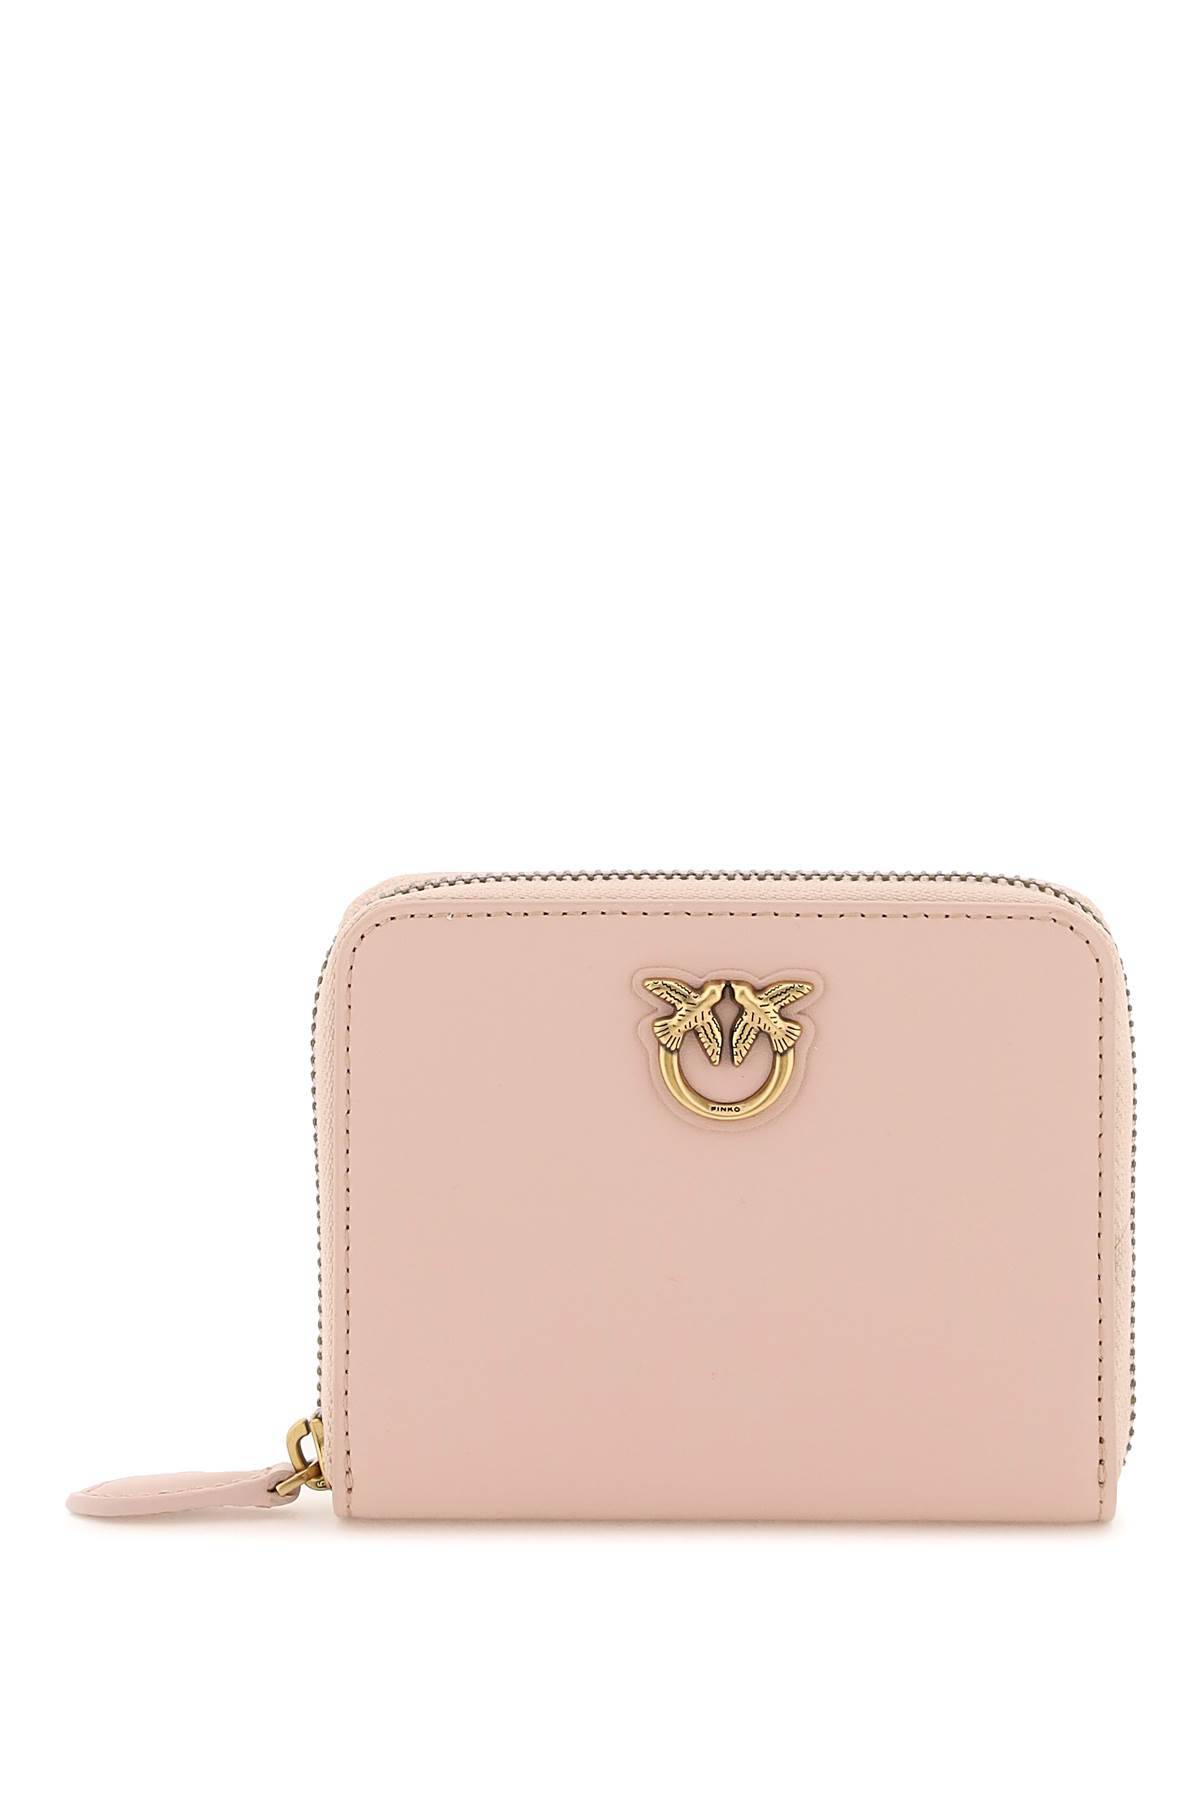 Pinko Square Leather Zip-around Purse In Pink/dusty Pink-antique Gold